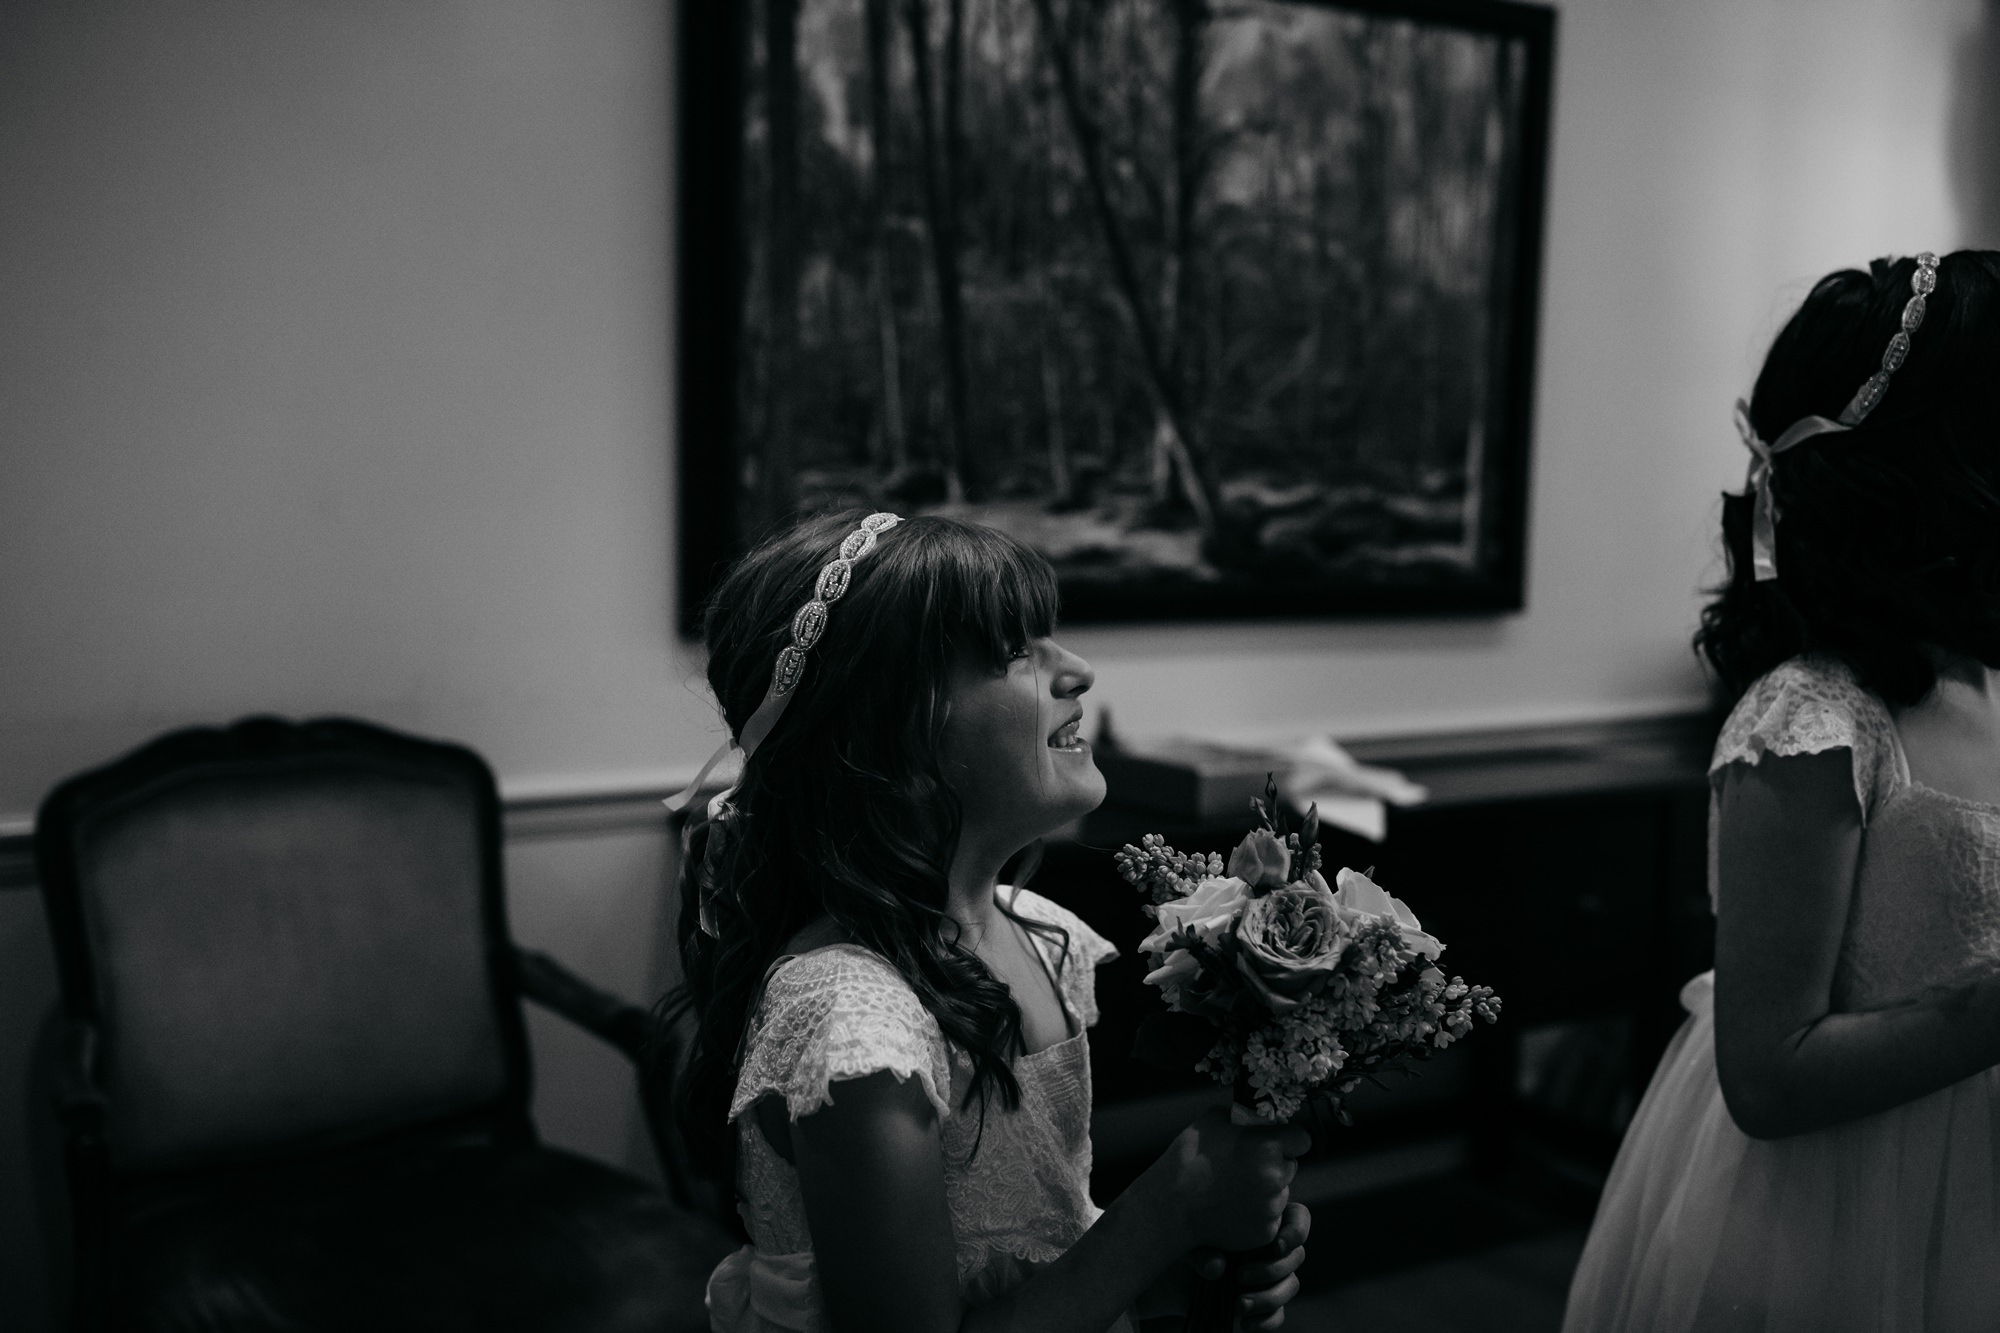 Little girl excitedly watched bride walk down the stairs at her High Wards wedding